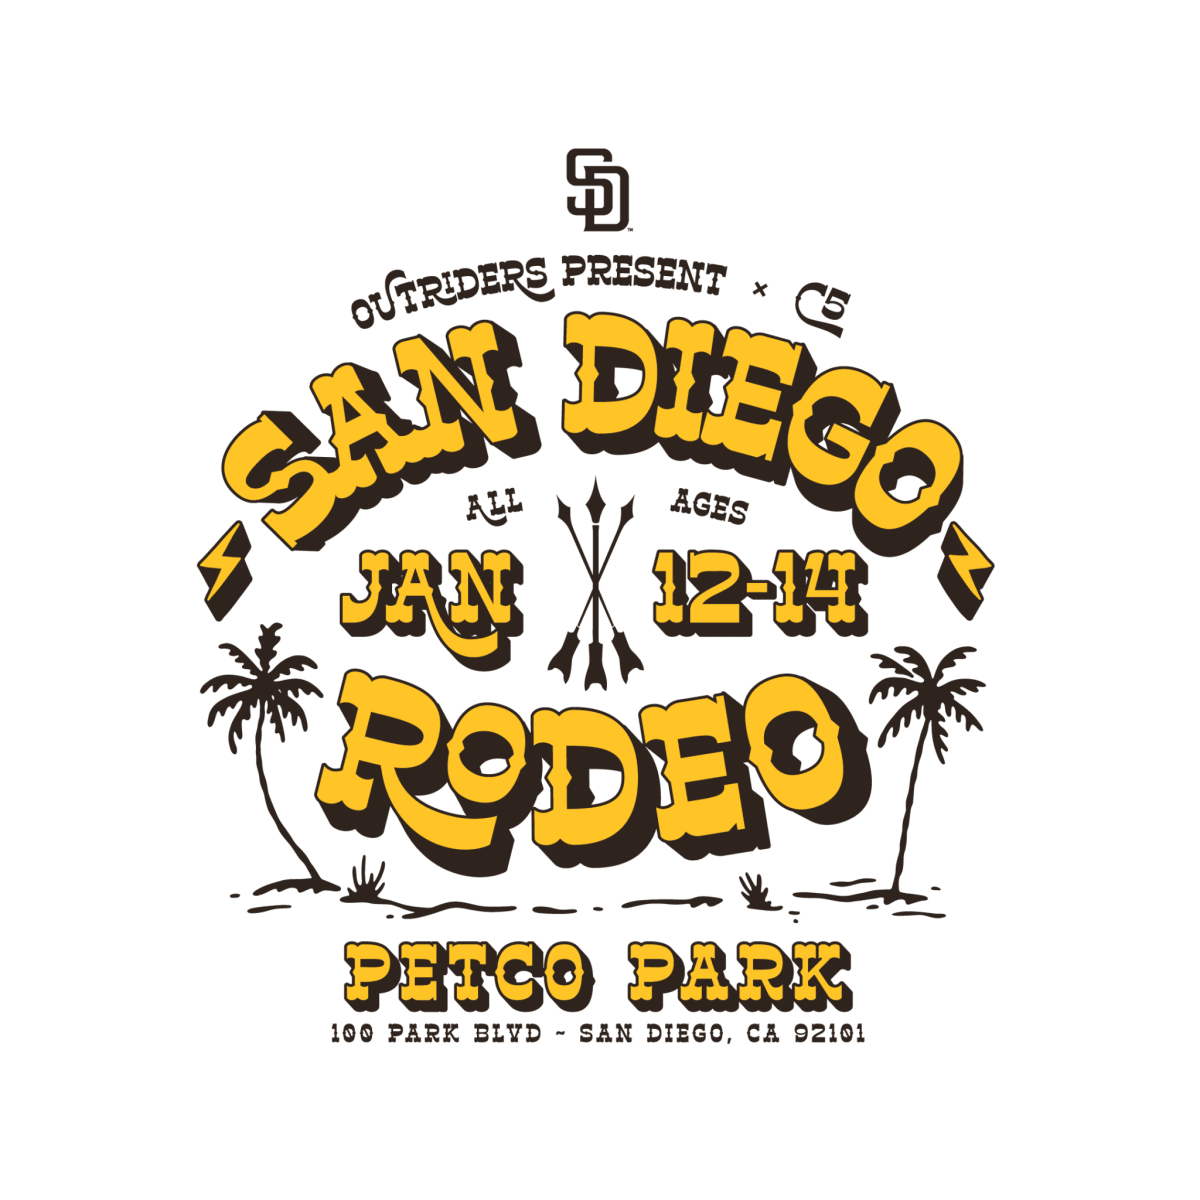 San Diego's first rodeo since 1980s opens Friday night at Petco Park